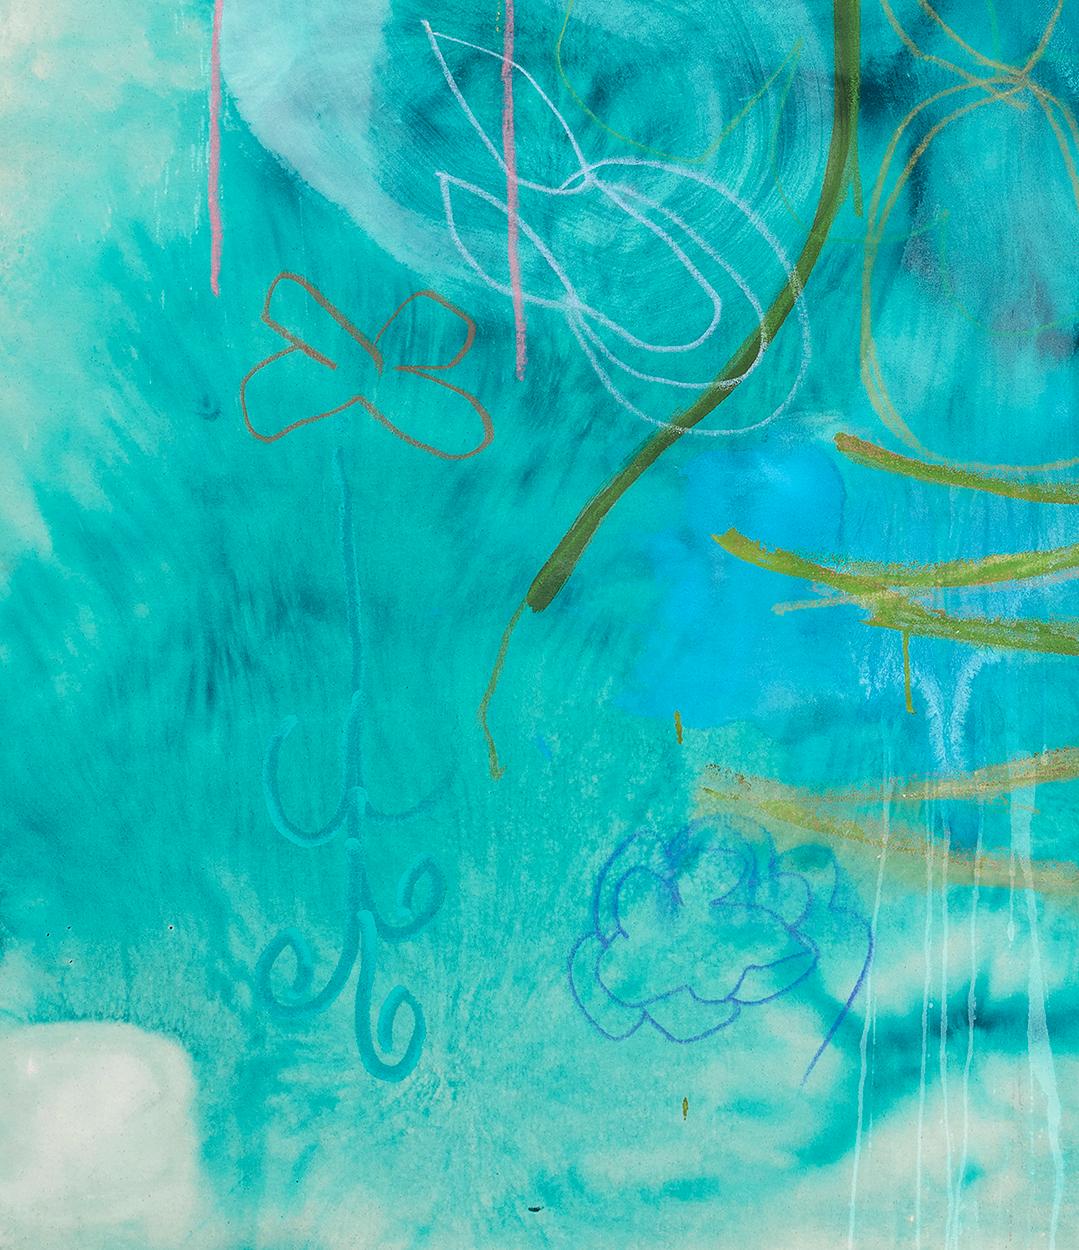 Techniques mixtes_Floral_Abstract_Turquoise, Blue_Jane Booth, Fleeting Dream, 2022 en vente 2